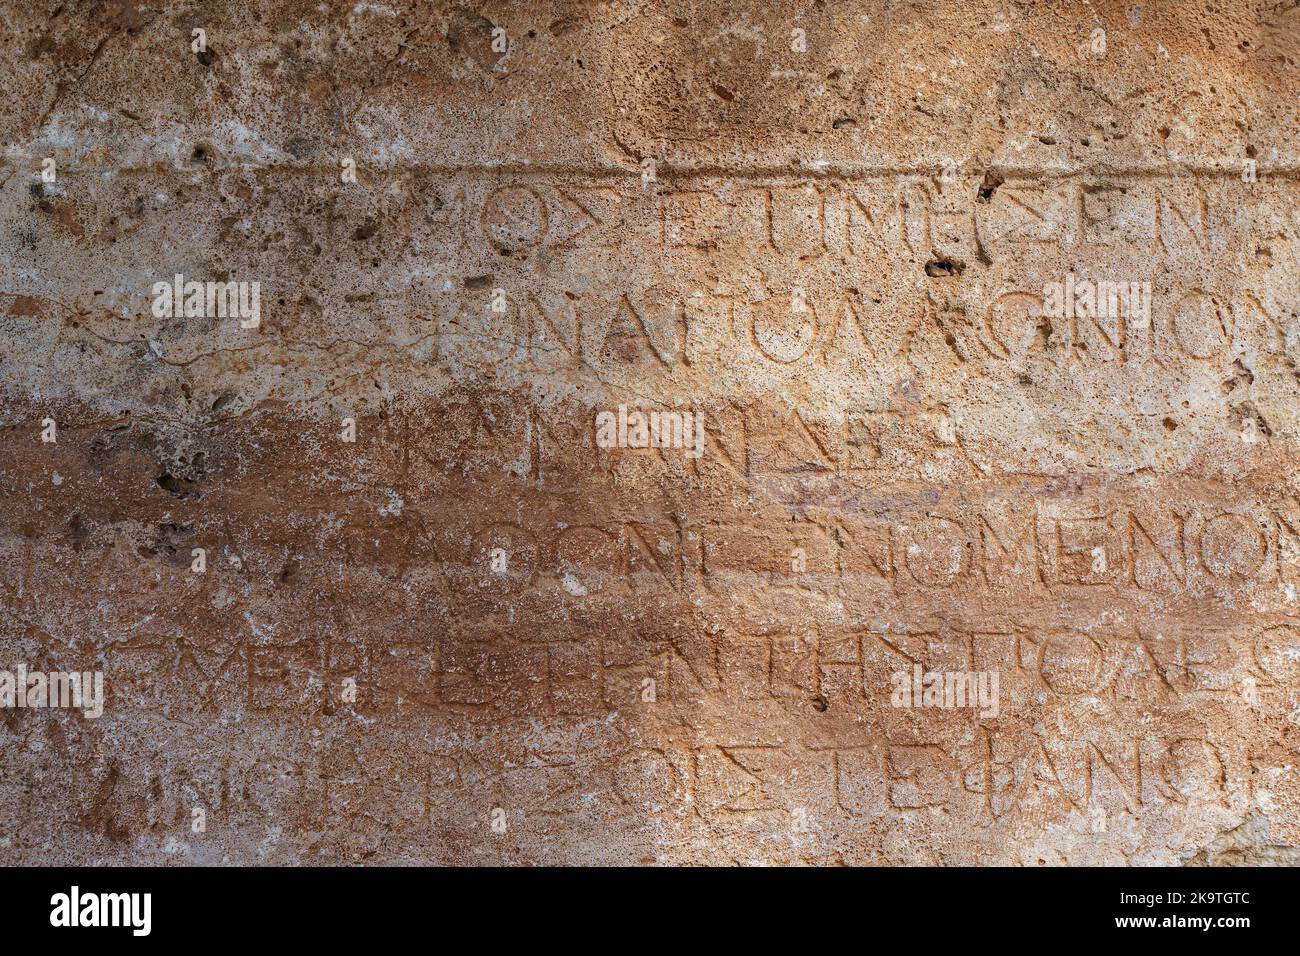 Ancient Greek antique text and inscriptions on the stone wall of the temple. Ancient Greek culture, alphabet and writing background, history concept. High quality photo Stock Photo